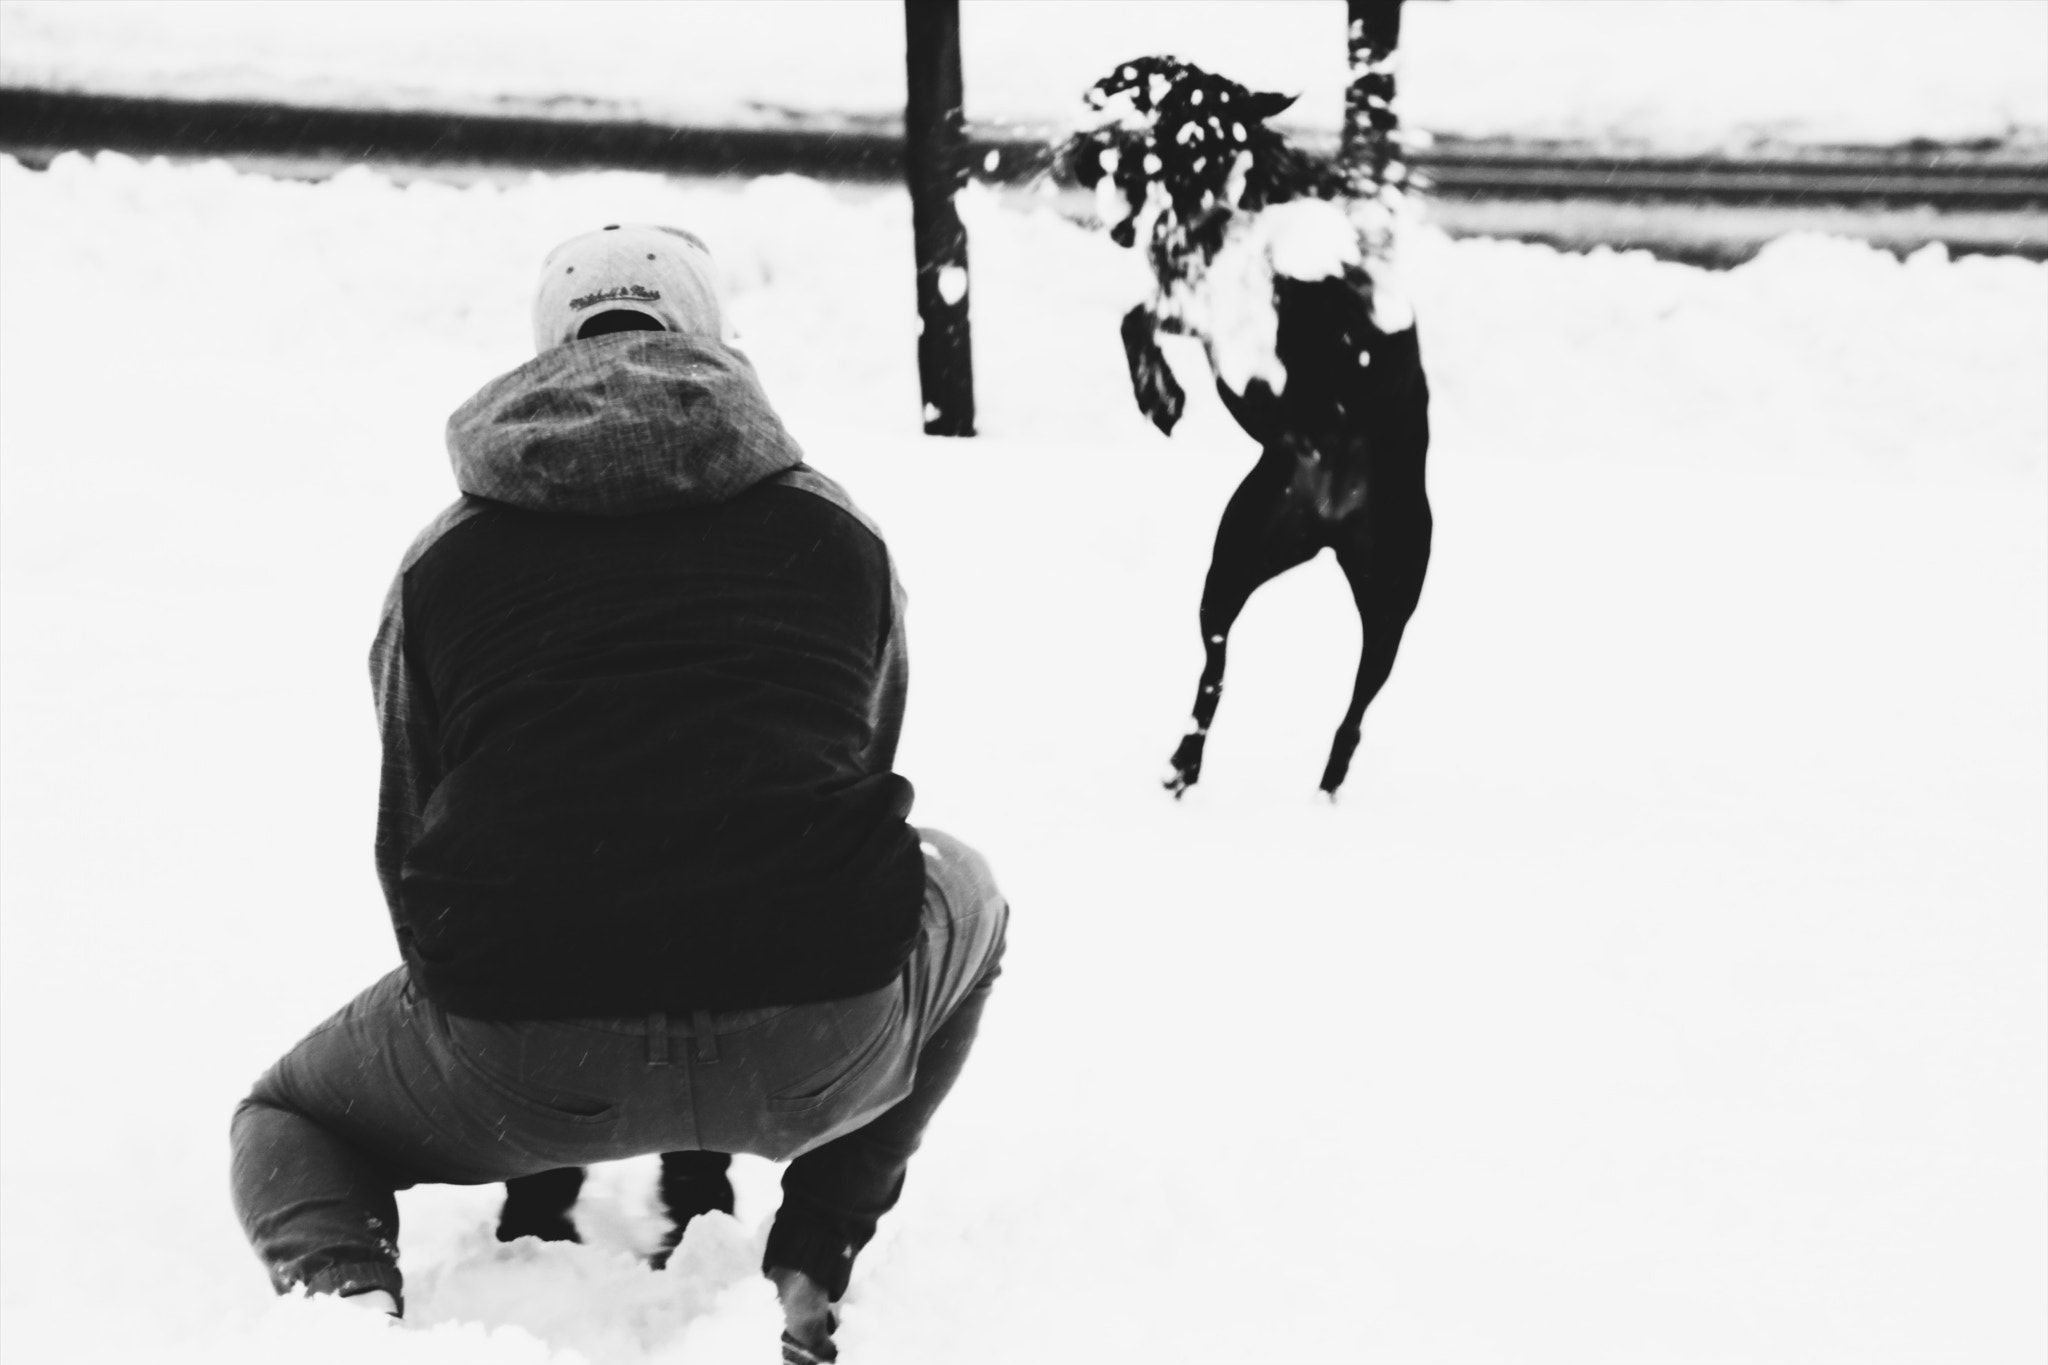 Canon EOS 700D (EOS Rebel T5i / EOS Kiss X7i) + Canon TAMRON 16-300mm F/3.5-6.3 Di II VC PZD B016 sample photo. A boy, his dog and a snow day. photography